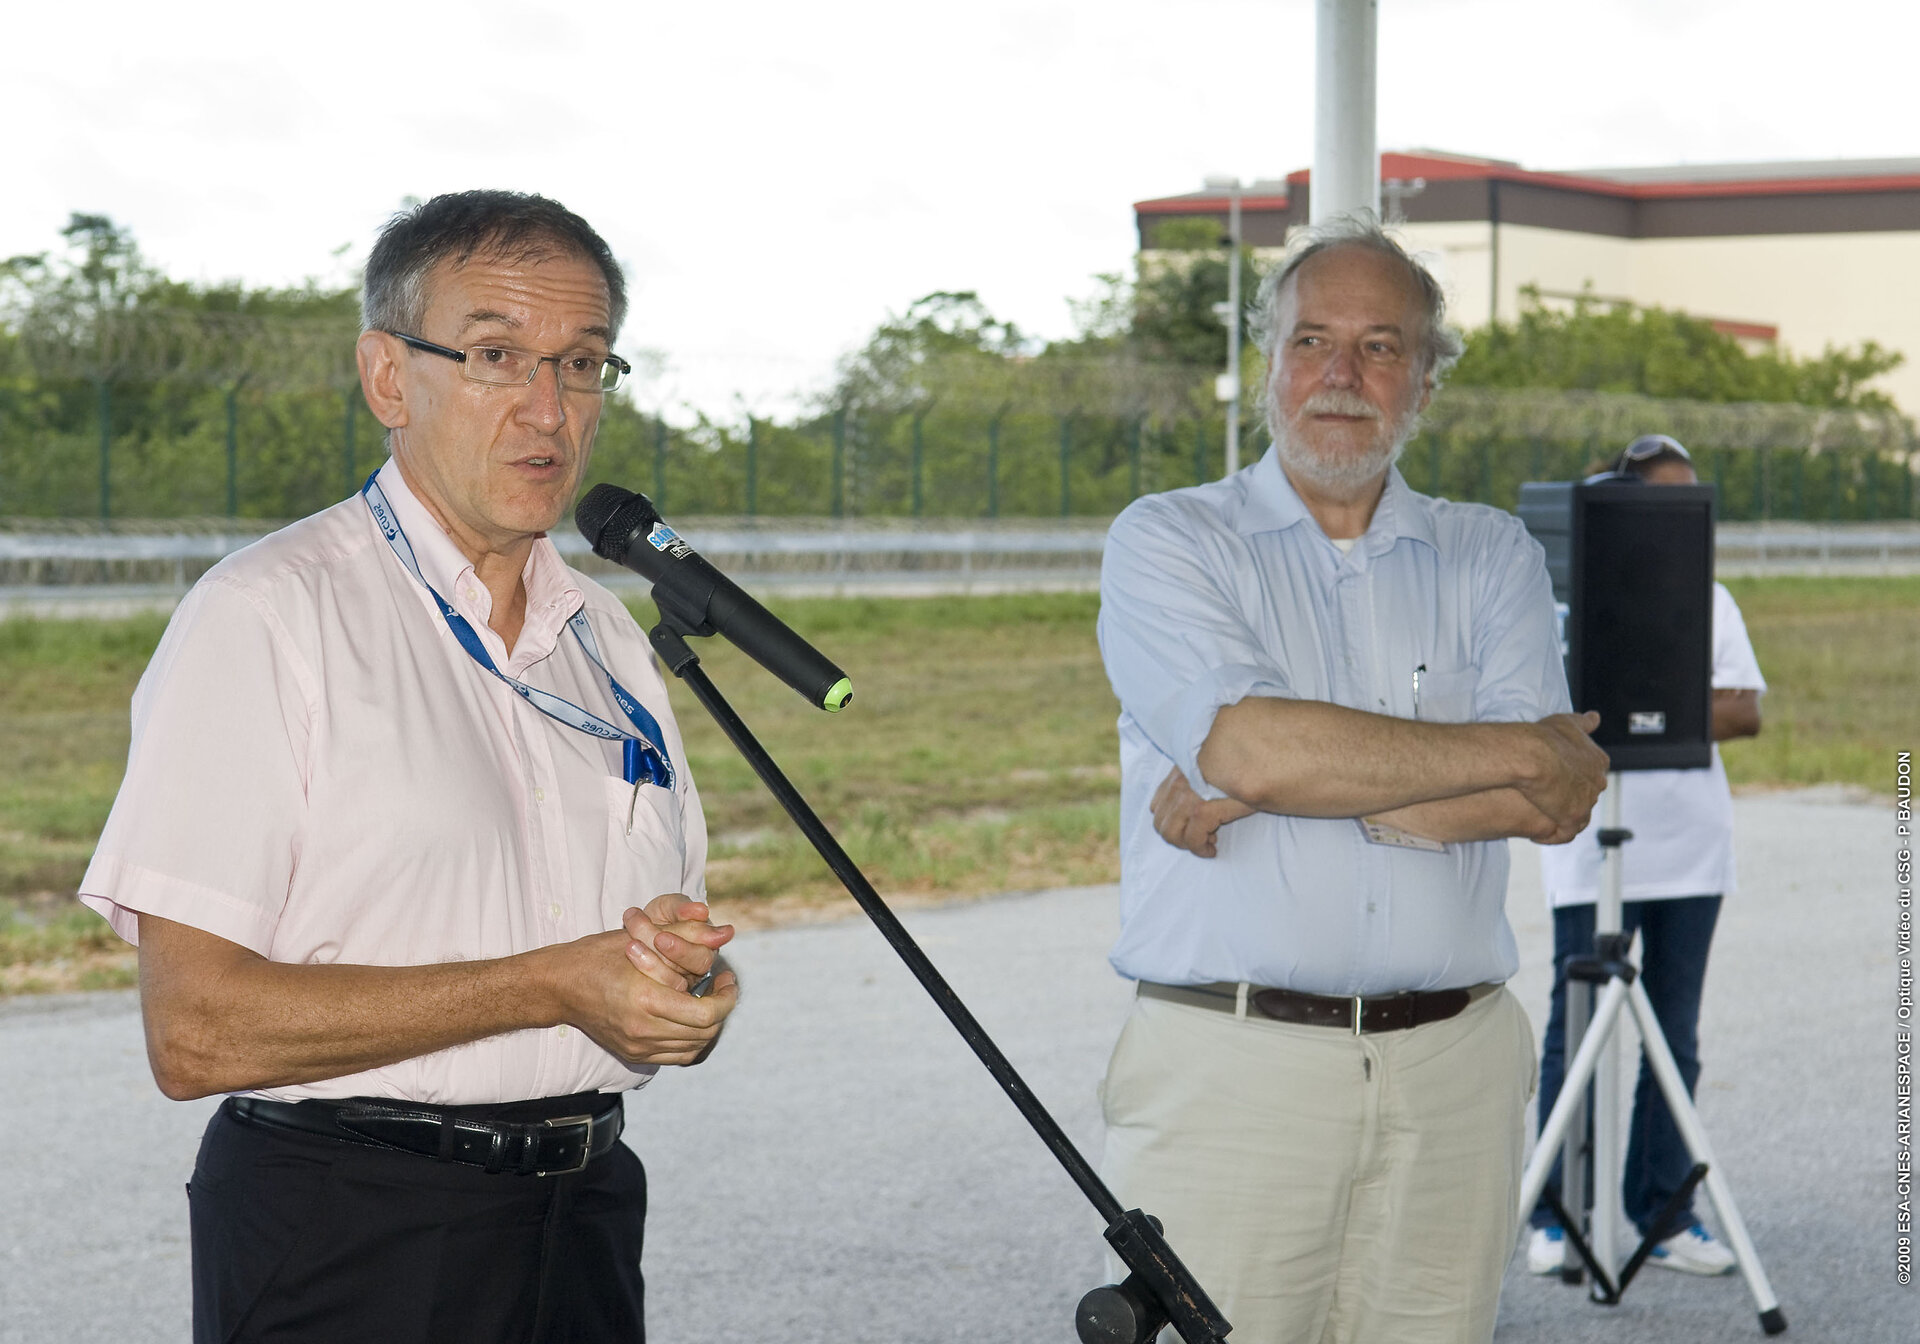 Inauguration of site of Galileo station at Kourou